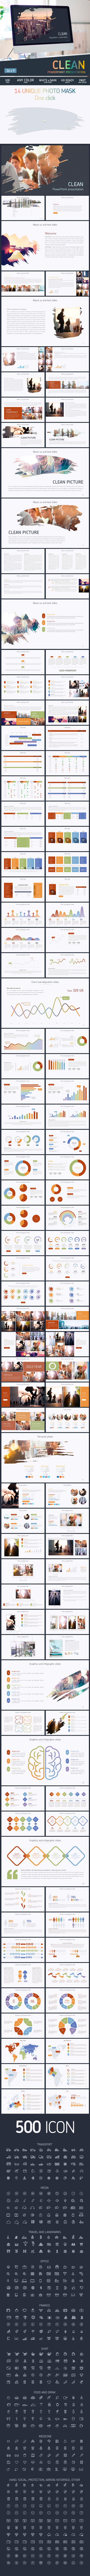 Clean Powerpoint template